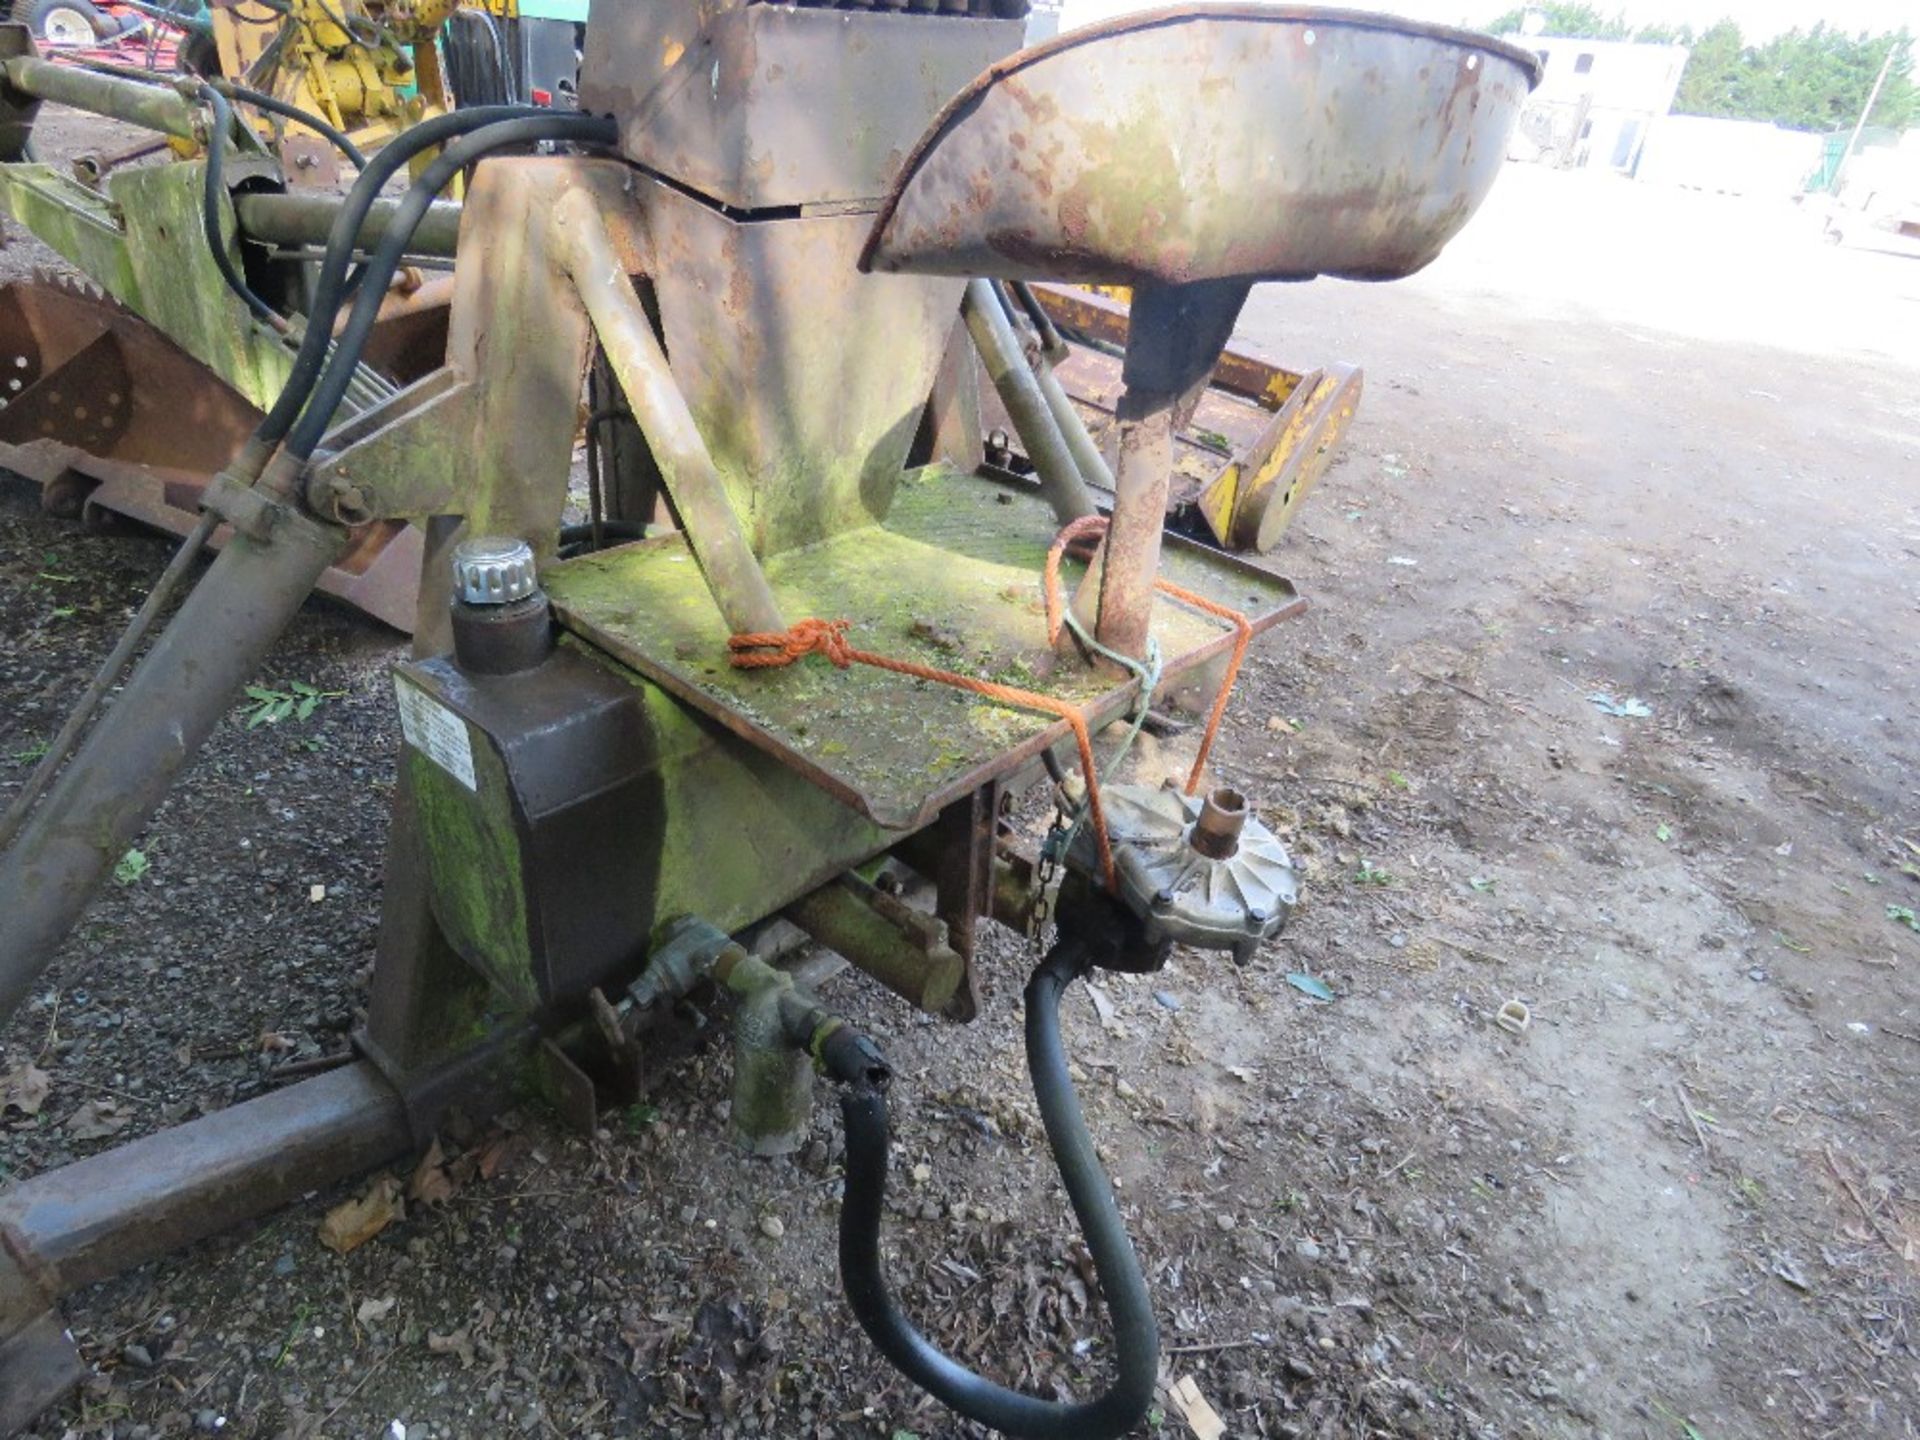 DAVID BROWN 3 POINT LINKAGE MOUNTED BACK ACTOR UNIT C/W 2 X BUCKETS - Image 4 of 7